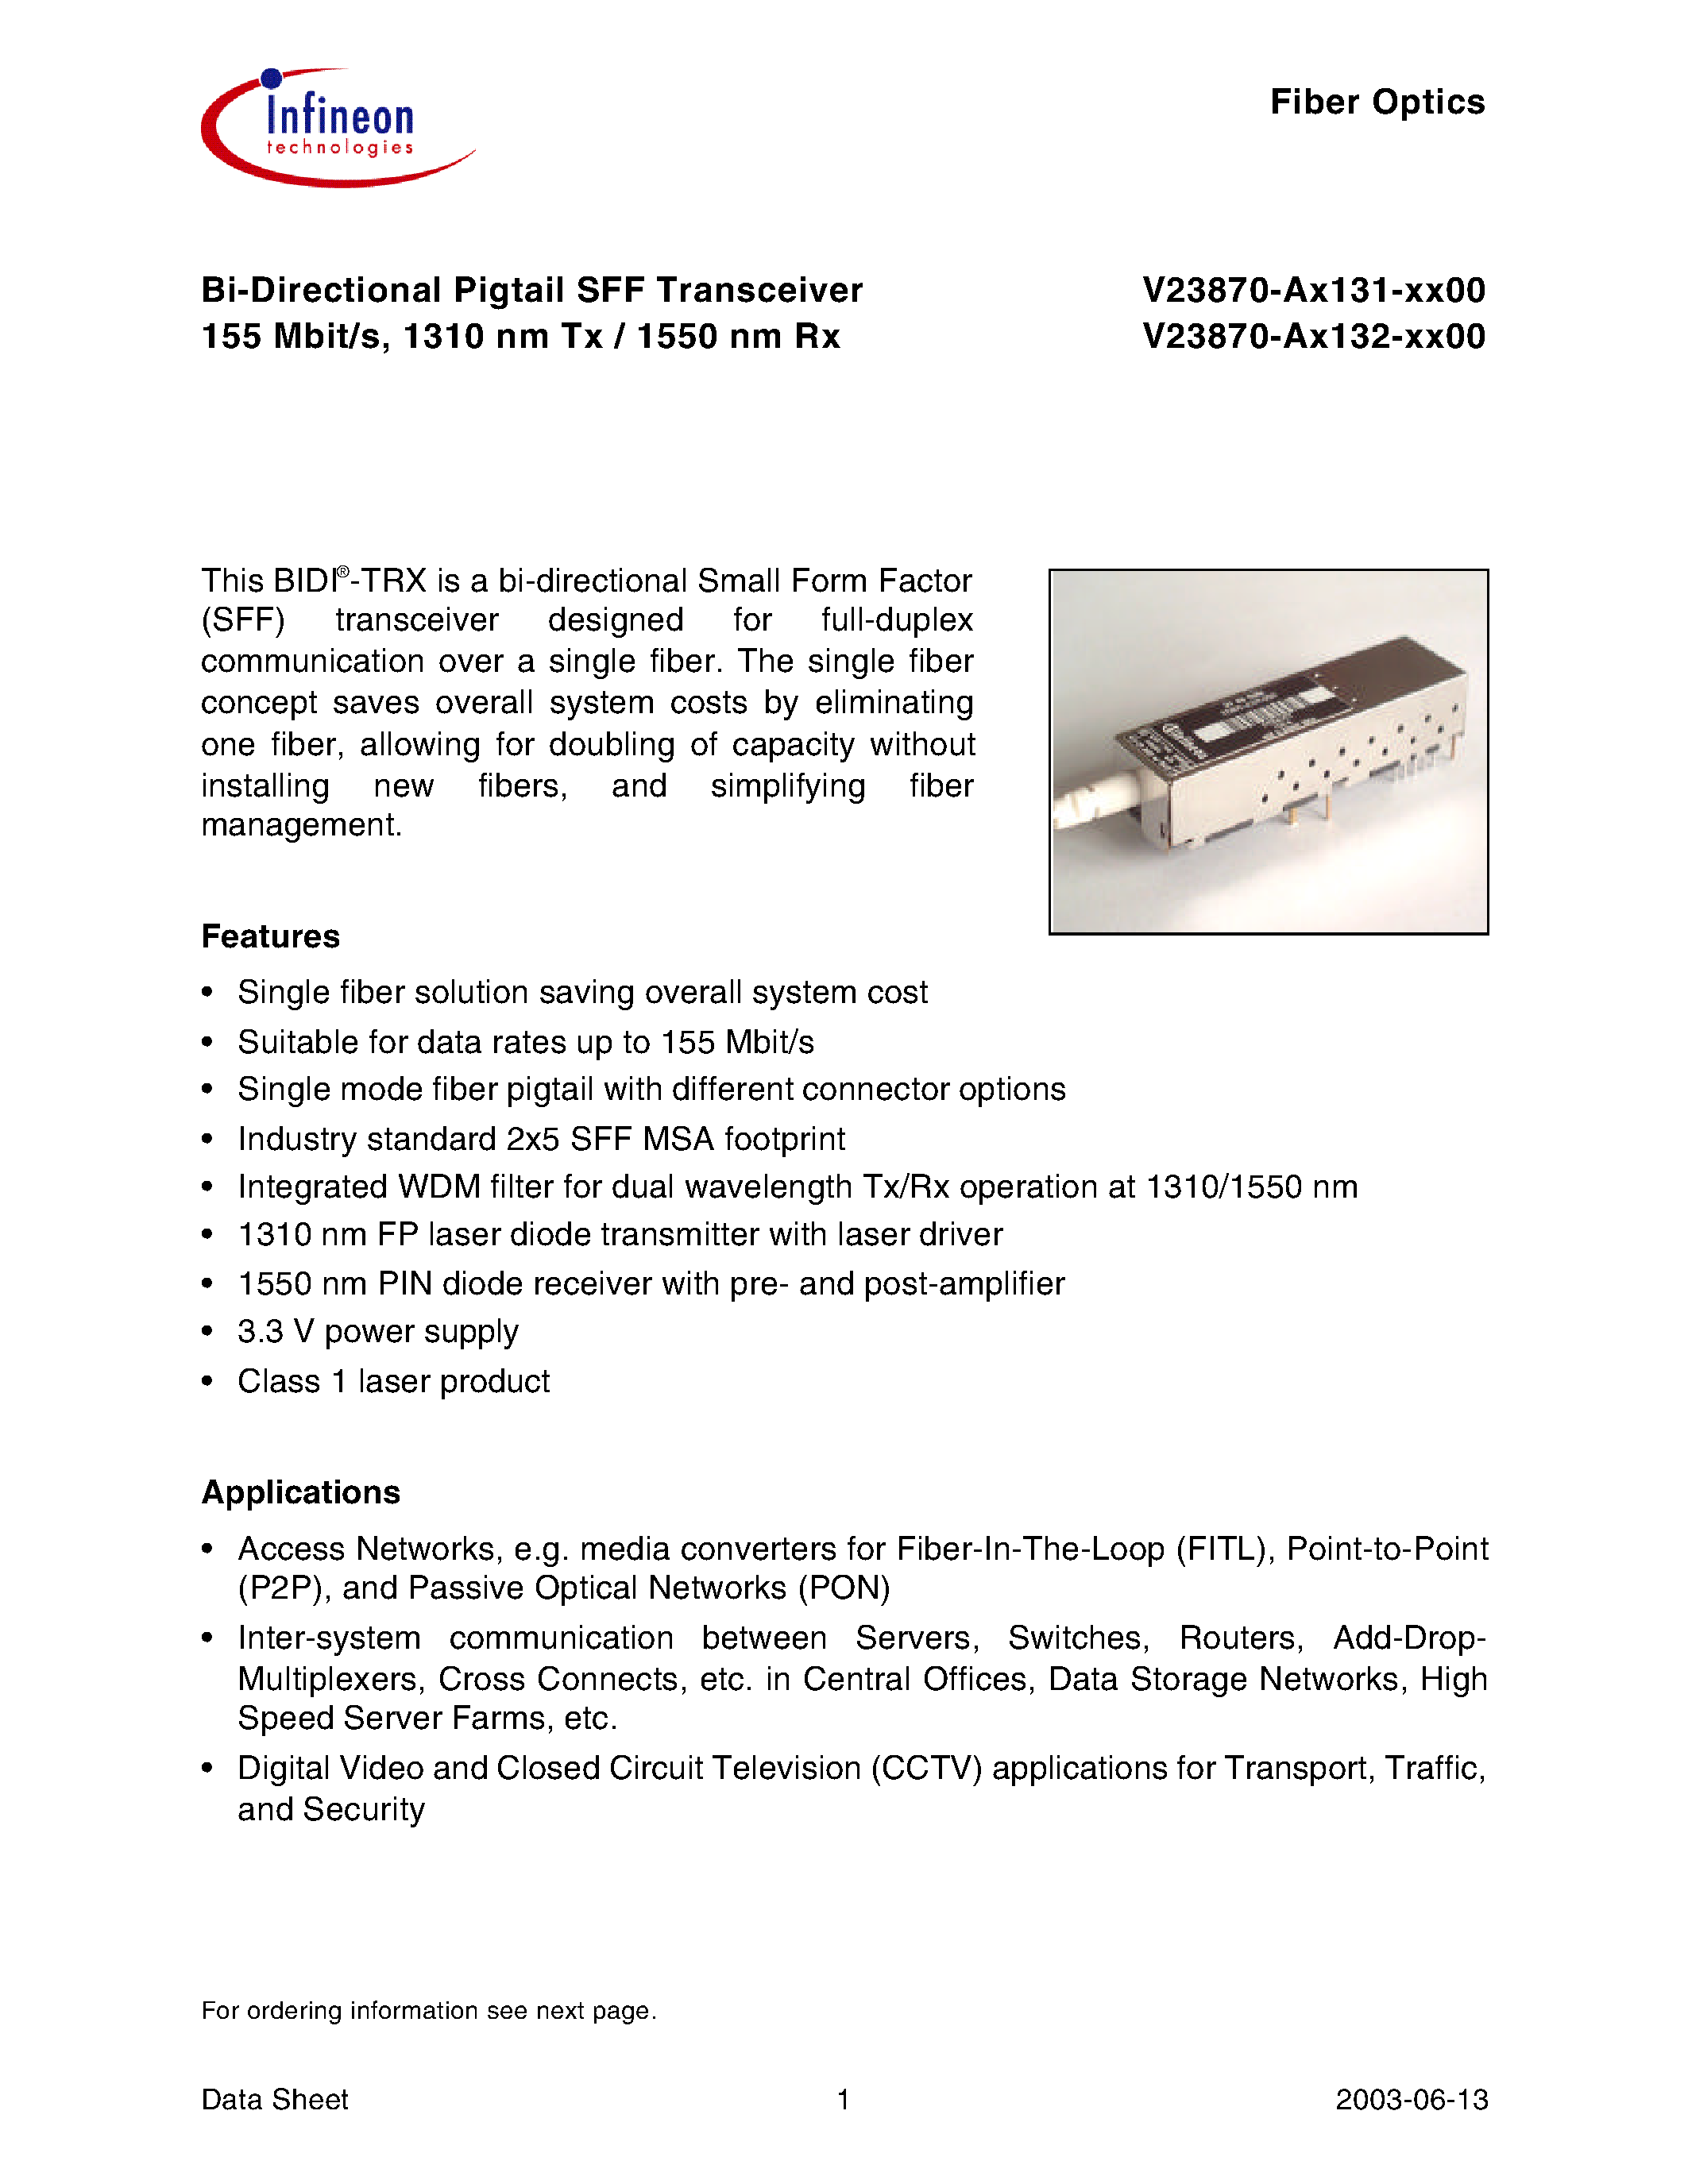 Datasheet V23870-A1131-H200 - Bi-Directional Pigtail SFF Transceiver 155 Mbit/s/ 1310 nm Tx / 1550 nm Rx page 1